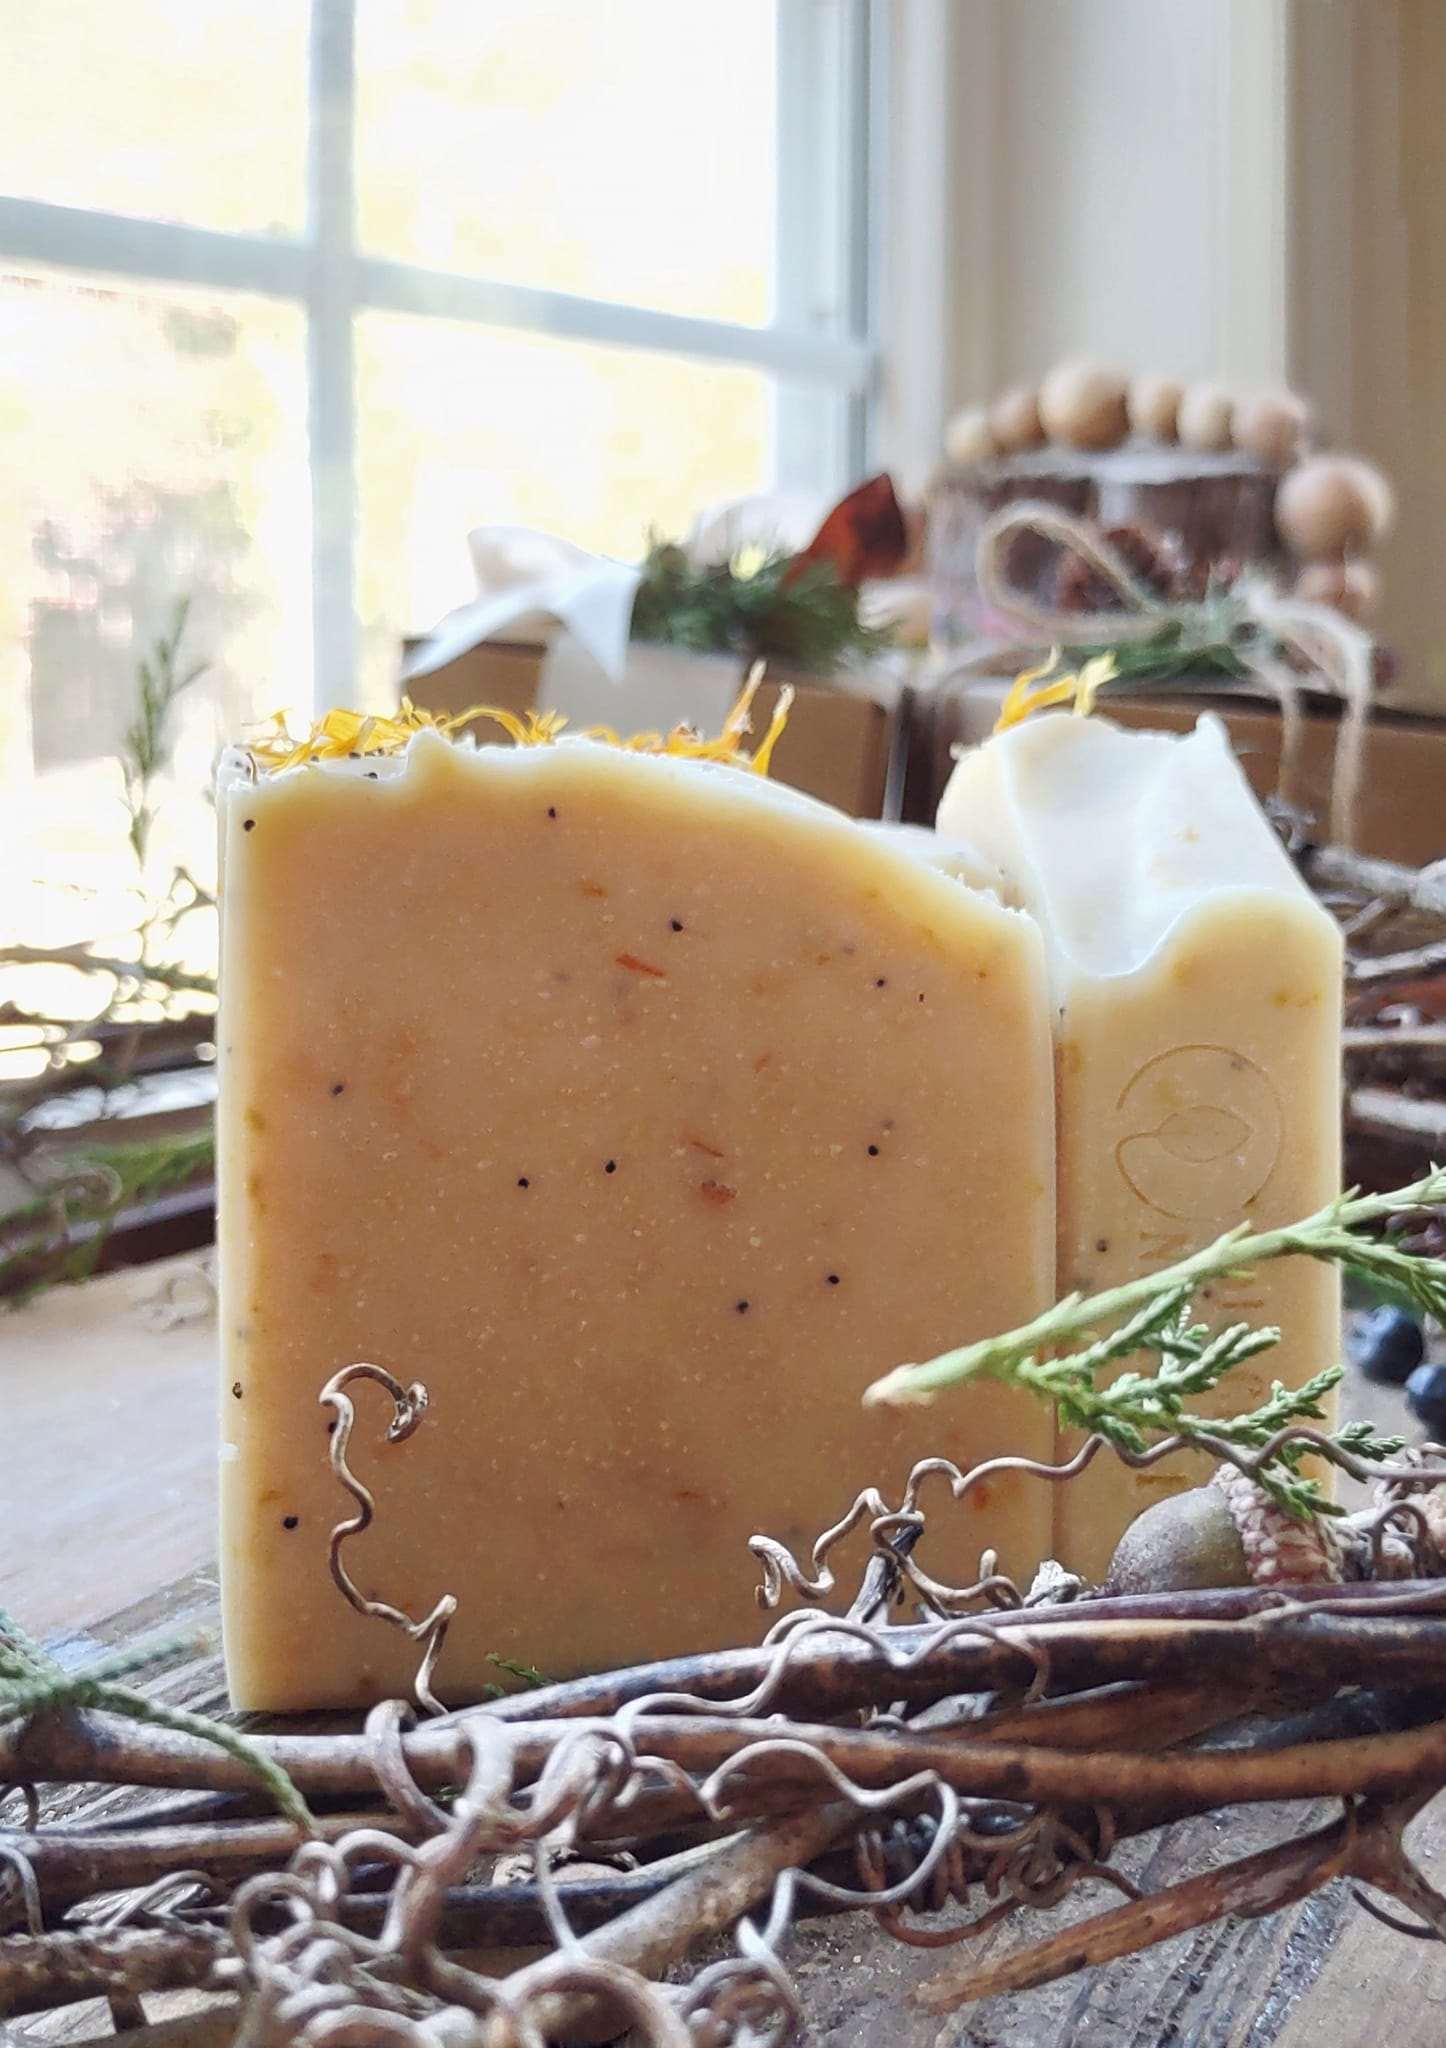 Blood Orange & Poppyseed - Goat Milk - Artisan Handcrafted Goat Milk Soap - Holiday Collection - Cold Creek Natural Farm